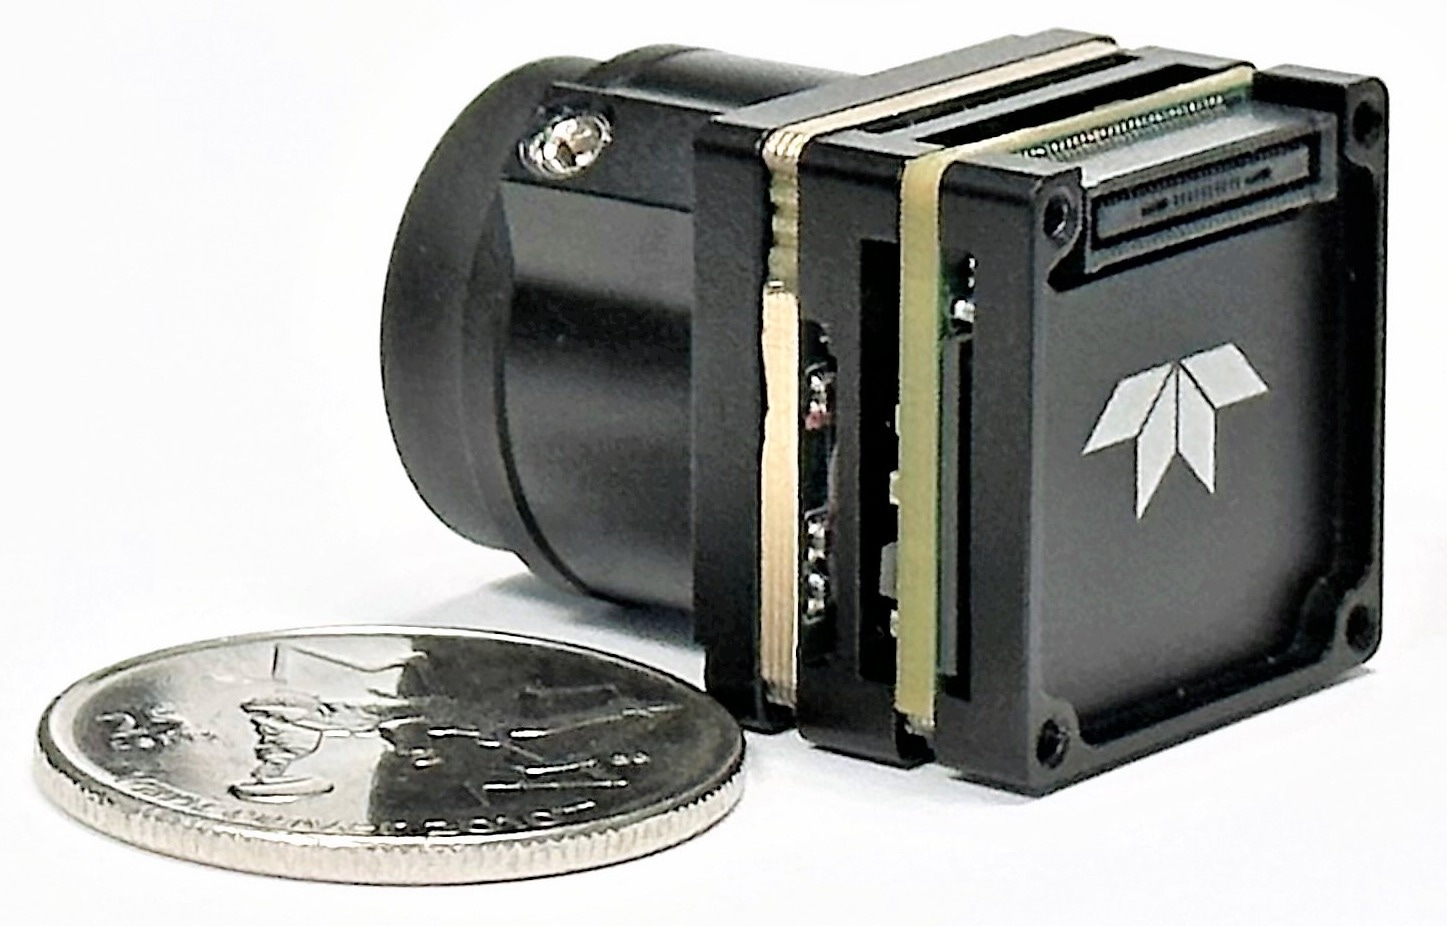 Teledyne Introduces Shutterless Version of Its Compact Thermal Camera Core